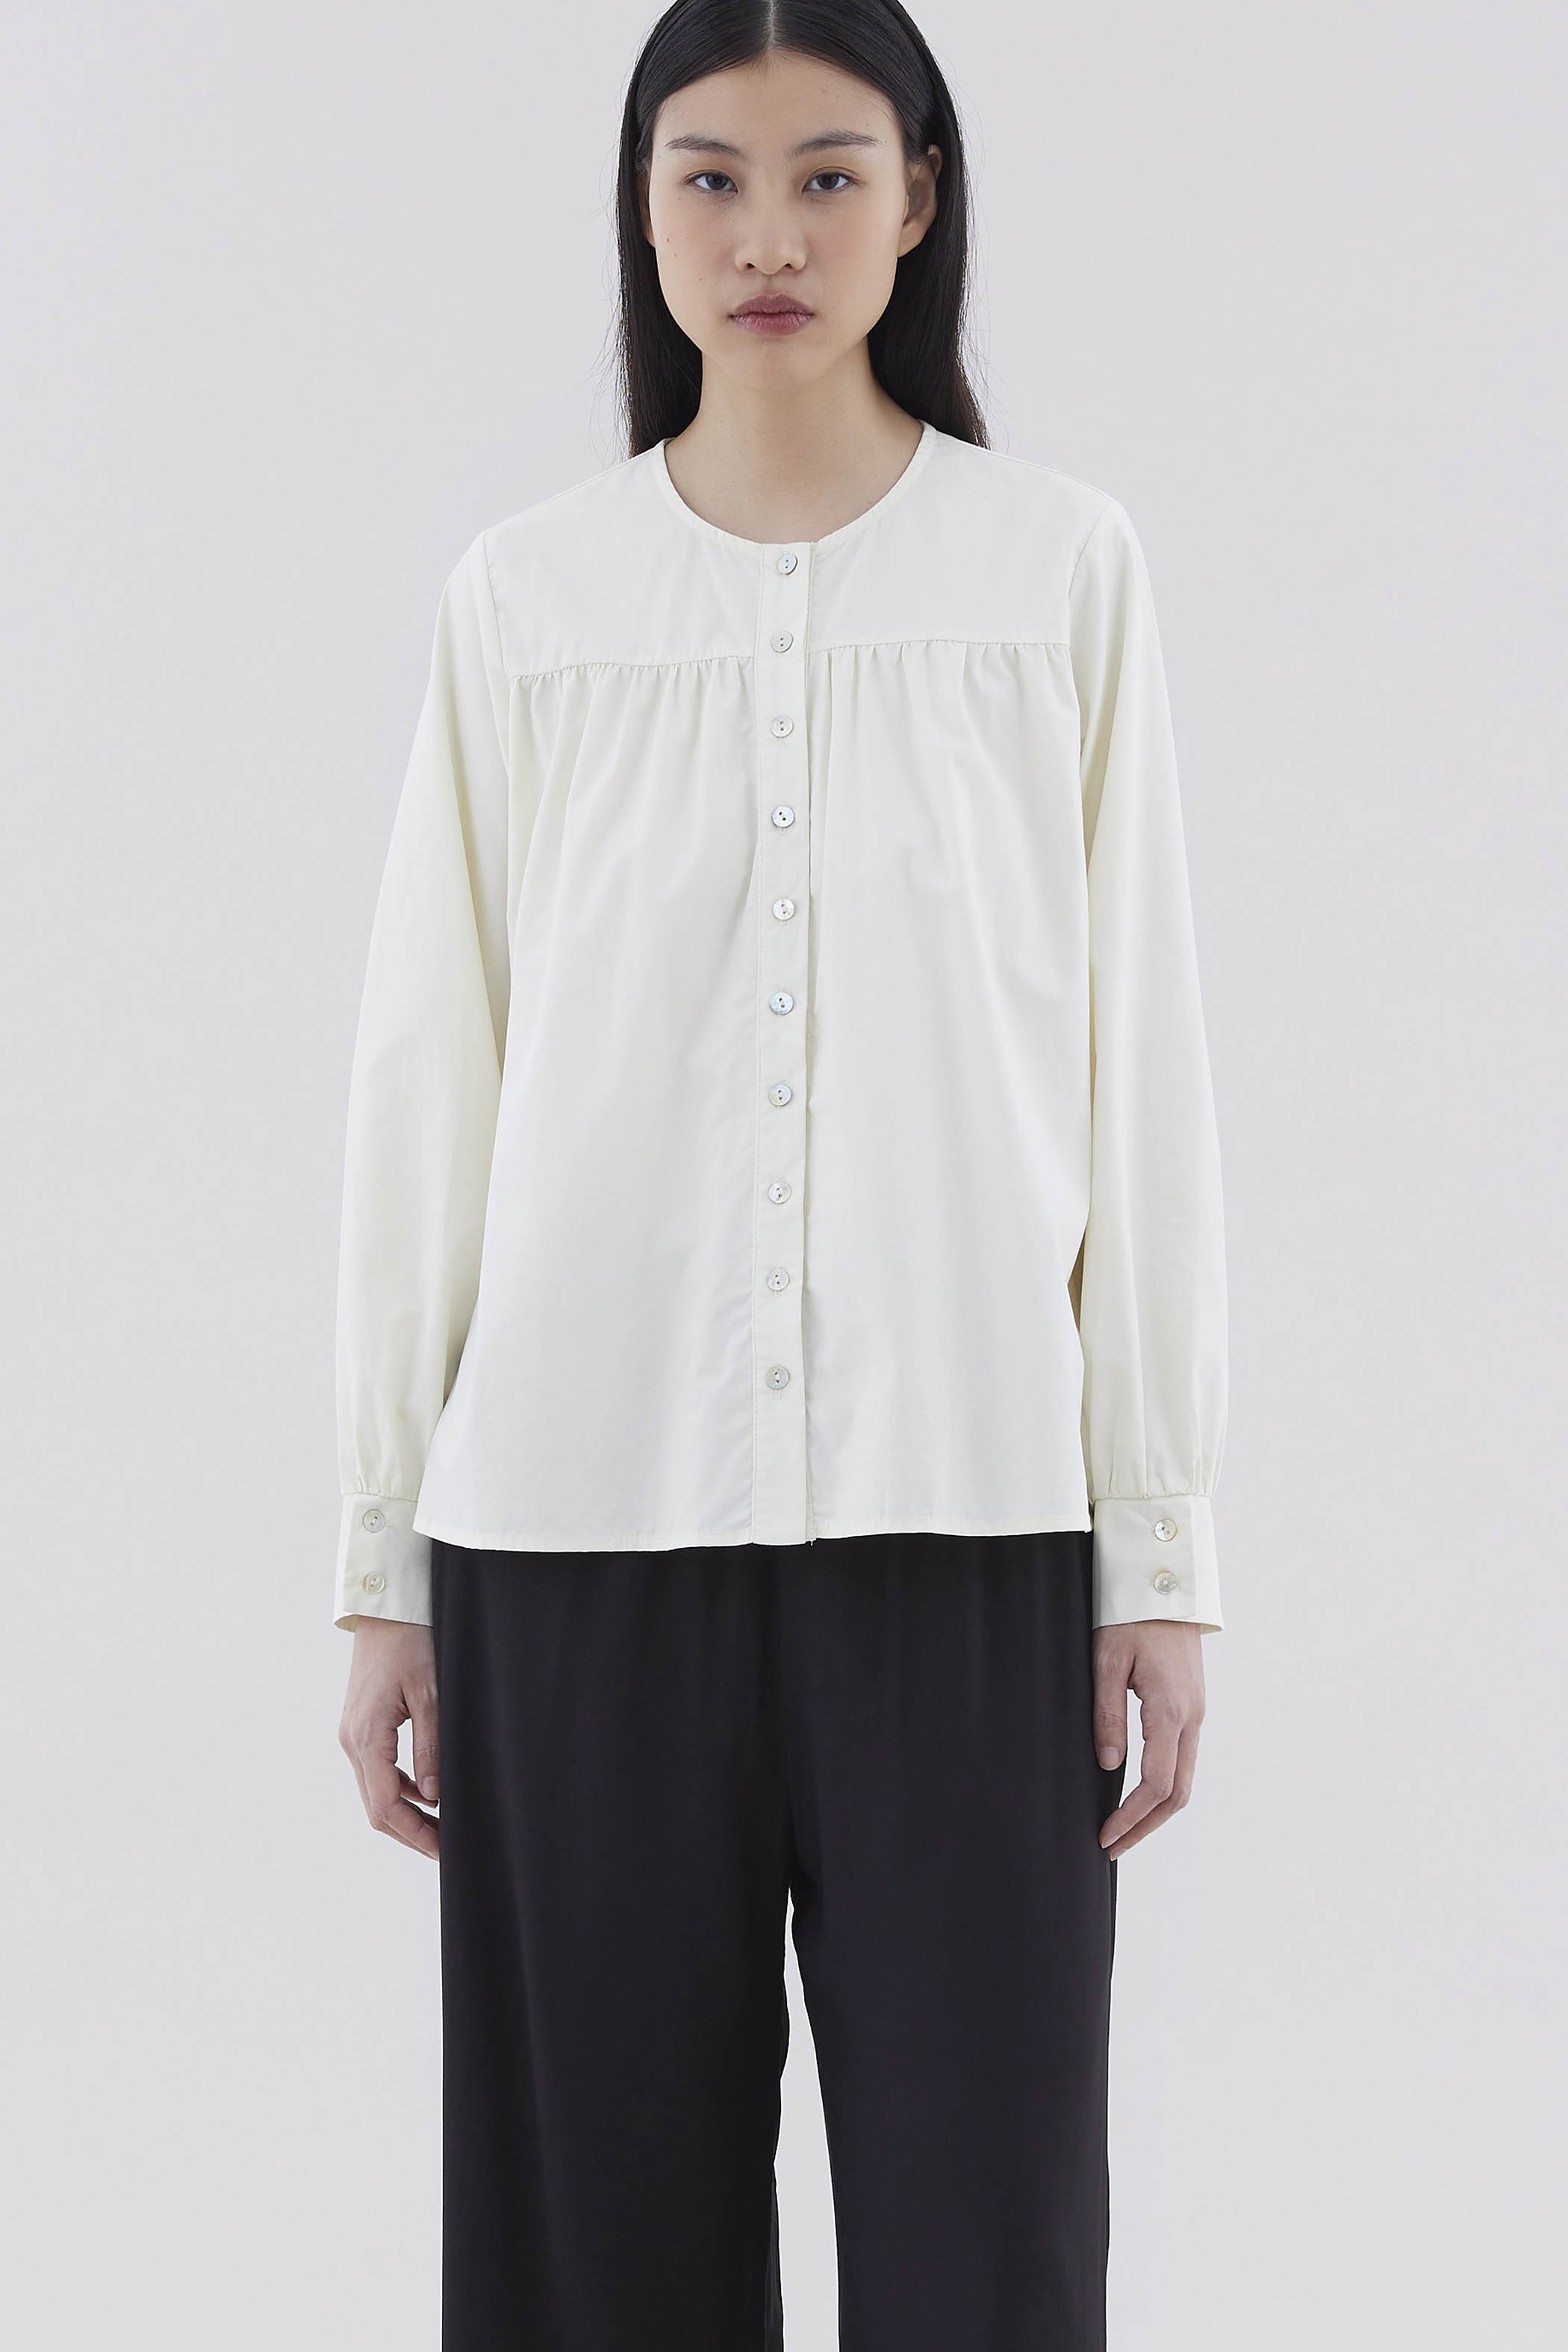 Sherlo Relaxed Blouse